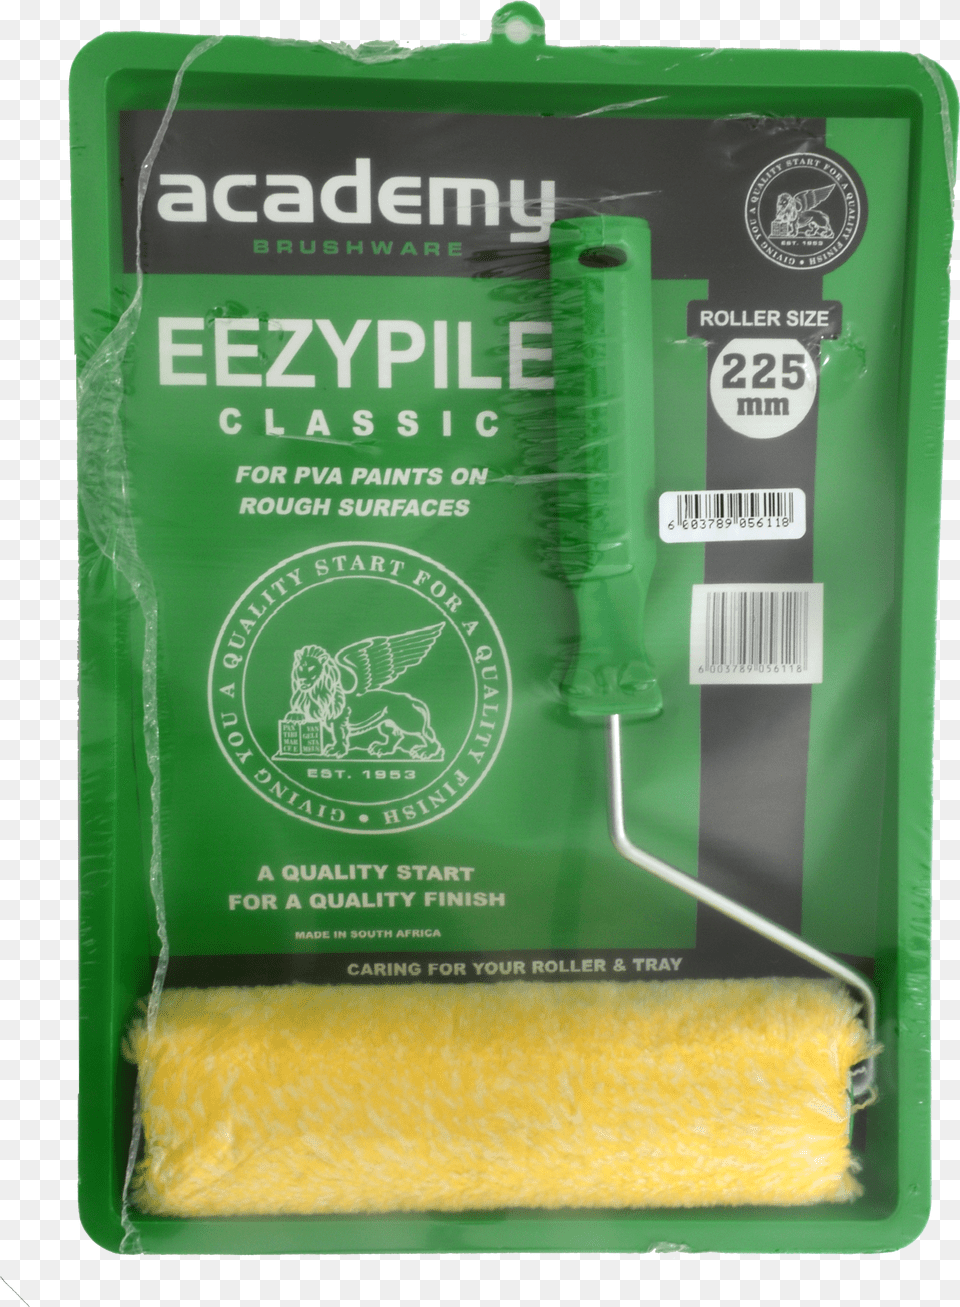 Academy Eezypile Paint Roller Roller Painter Eezypile 225 Complete Academy Free Png